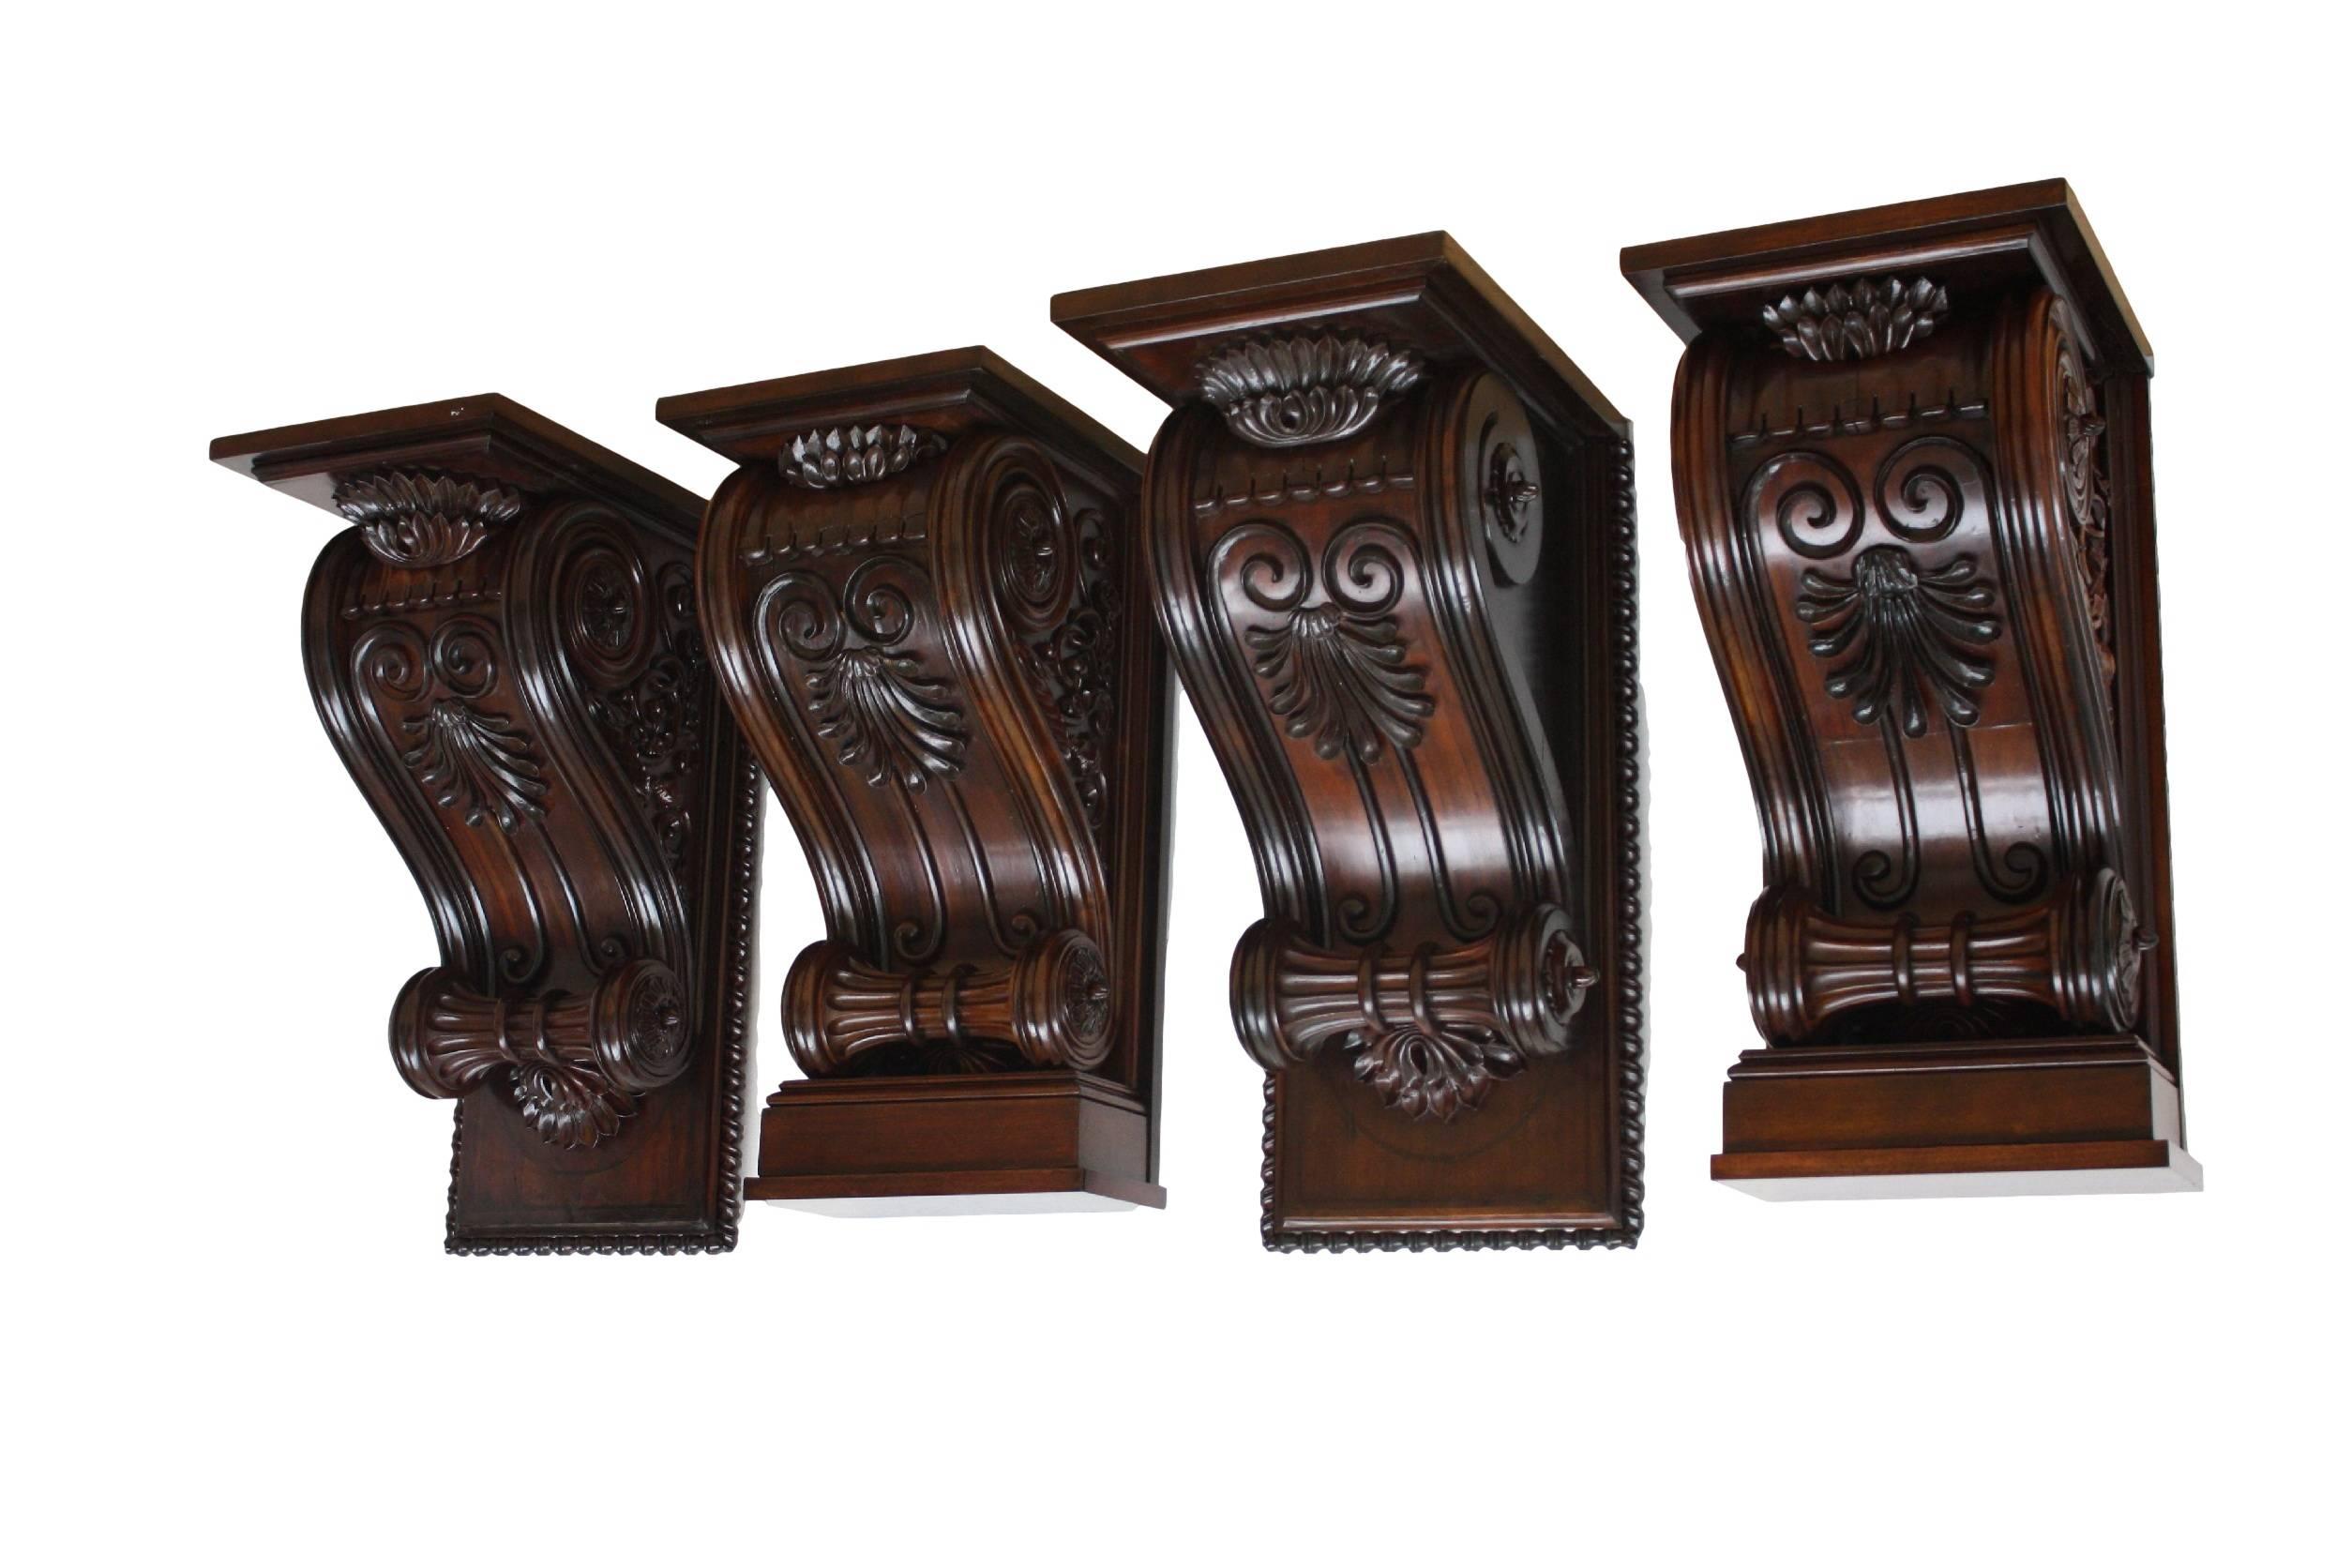 Four pieces, two pairs carved wall consoles or wall pedestals. Nut wood, well carved,
Austrian "Gründerzeit" around 1870, come out from a Vienna Palace.
Measures: One pair H 85 cm, D 53, 5 cm, W 41 cm.
One pair H 81 cm, D 45 cm, W 41